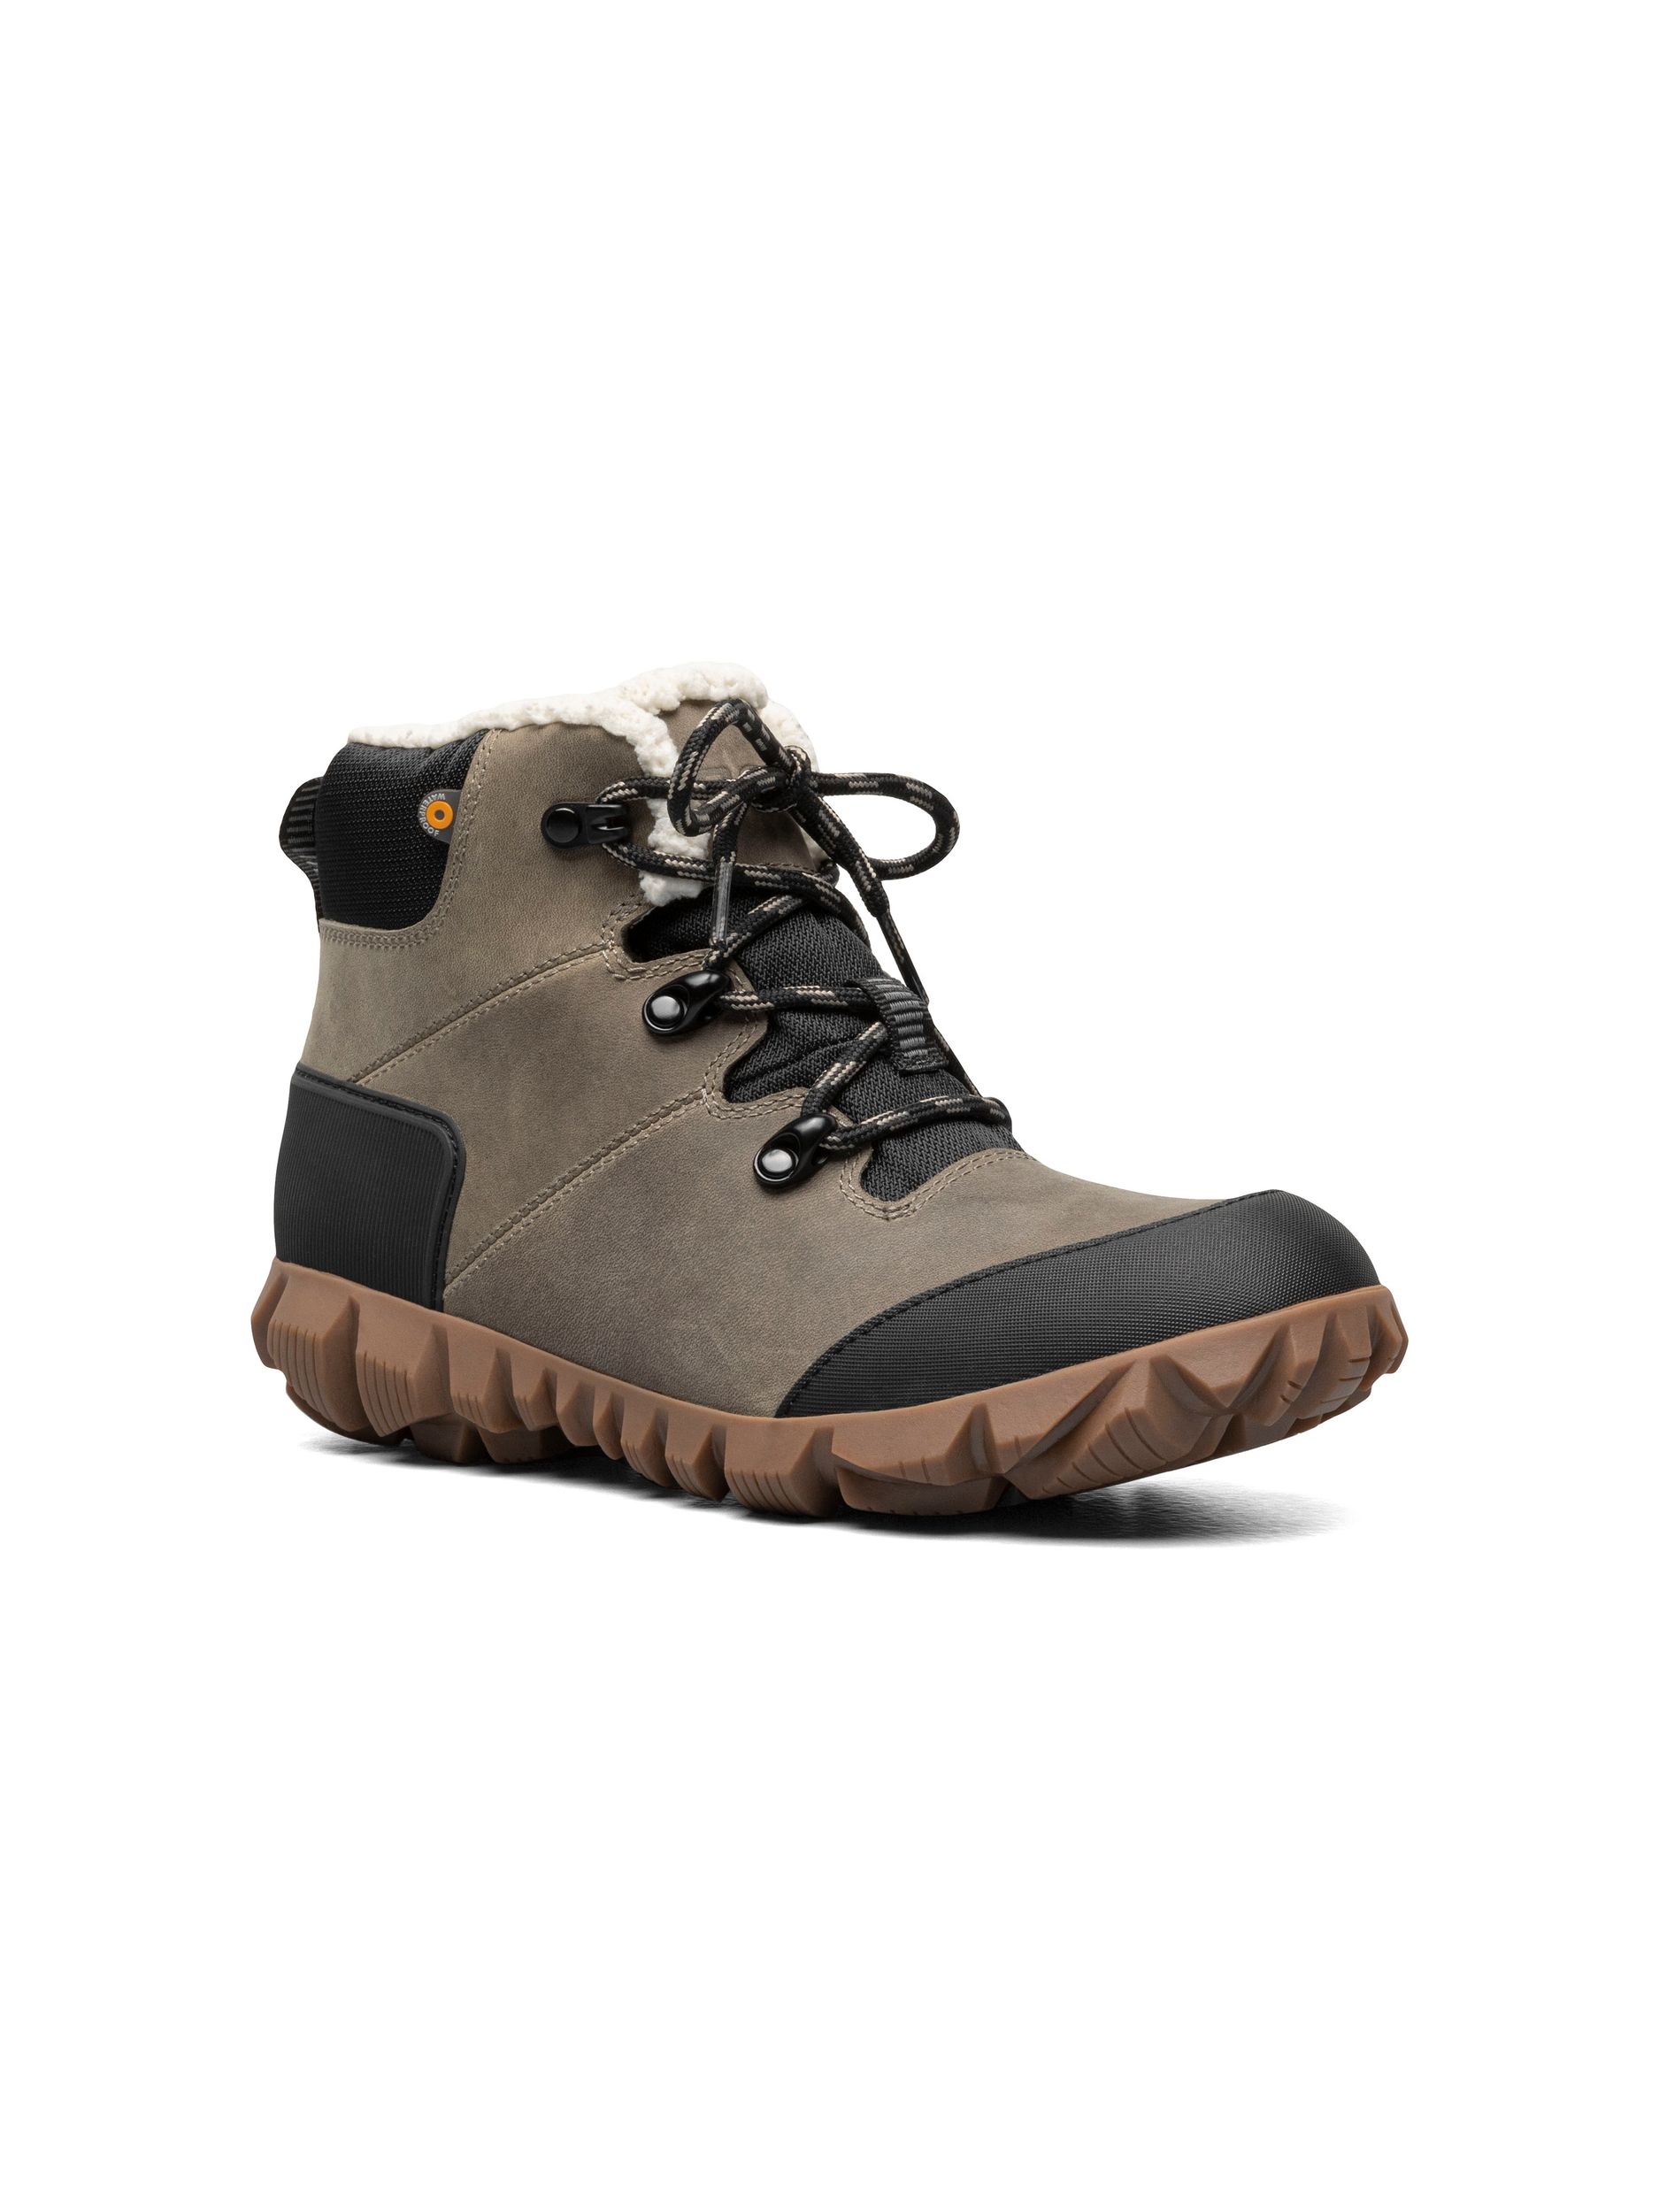 The North Face Women's Thermoball Lace-Up Waterproof Insulated Winter Boots